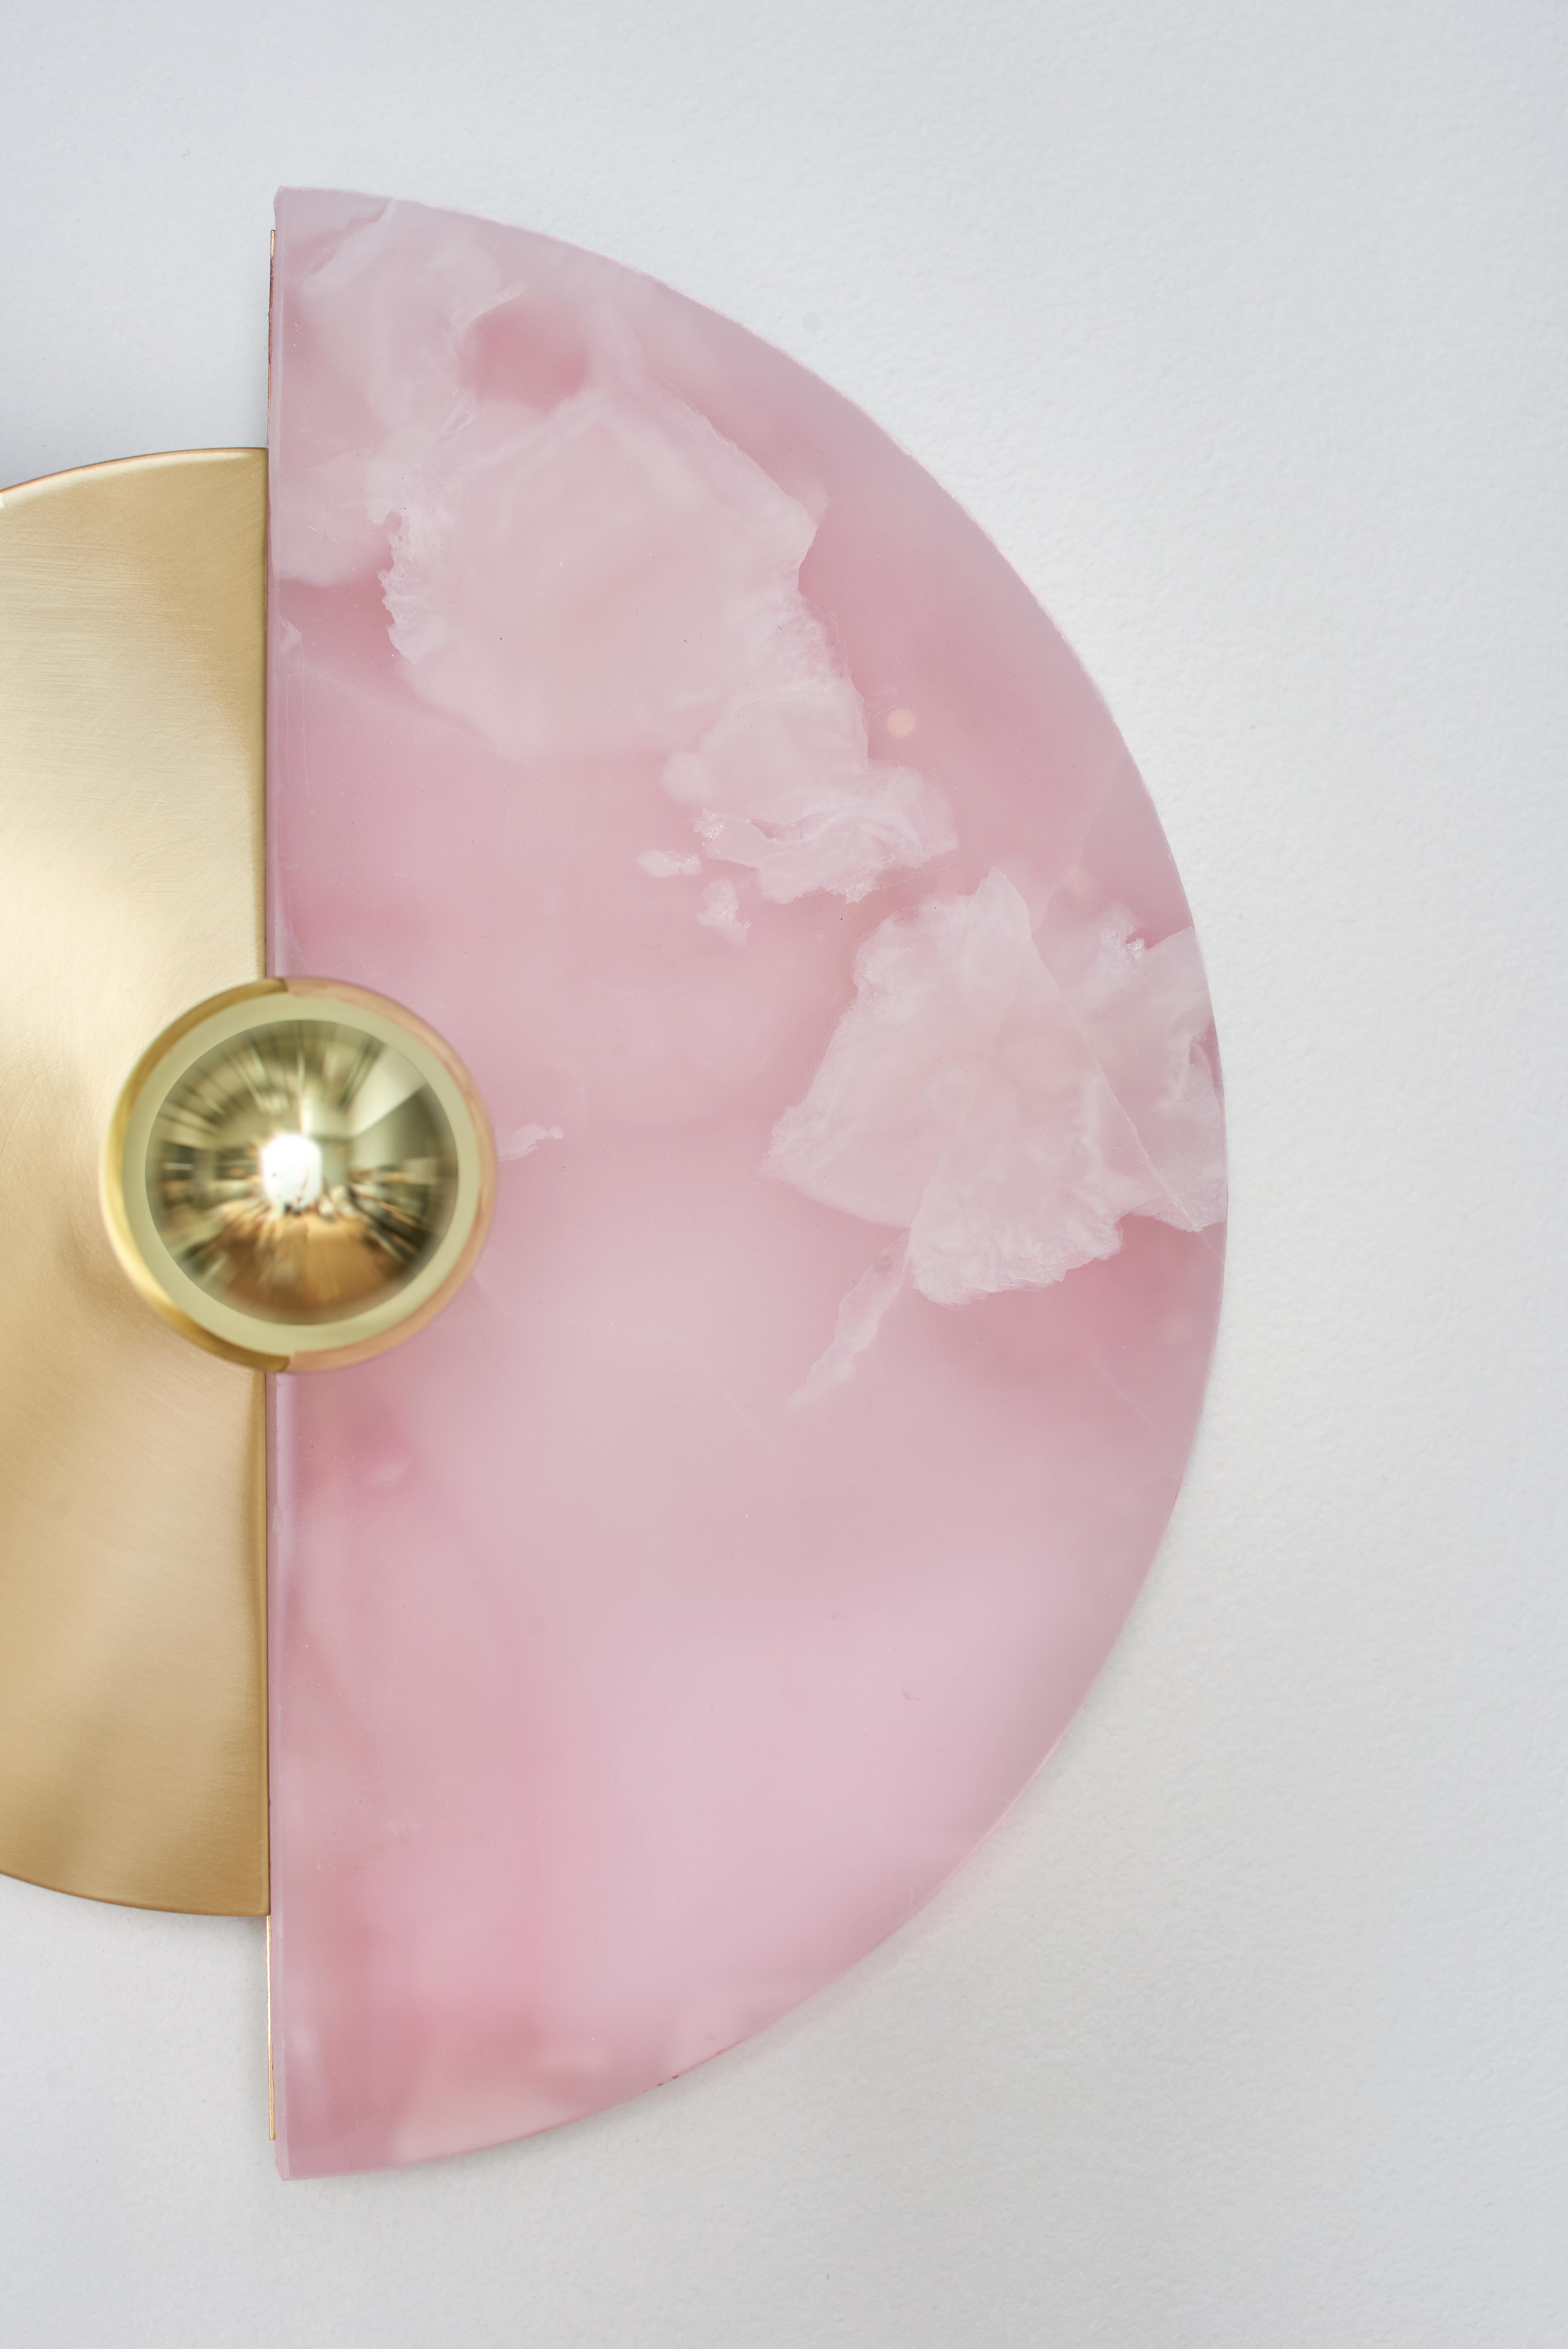 The Levante wall sconce with its circular shape is a strong reference to the sun. This design element gives the sconce an artistic and symbolic quality that can add interest and meaning to the decor of a room. The circular shape is often associated